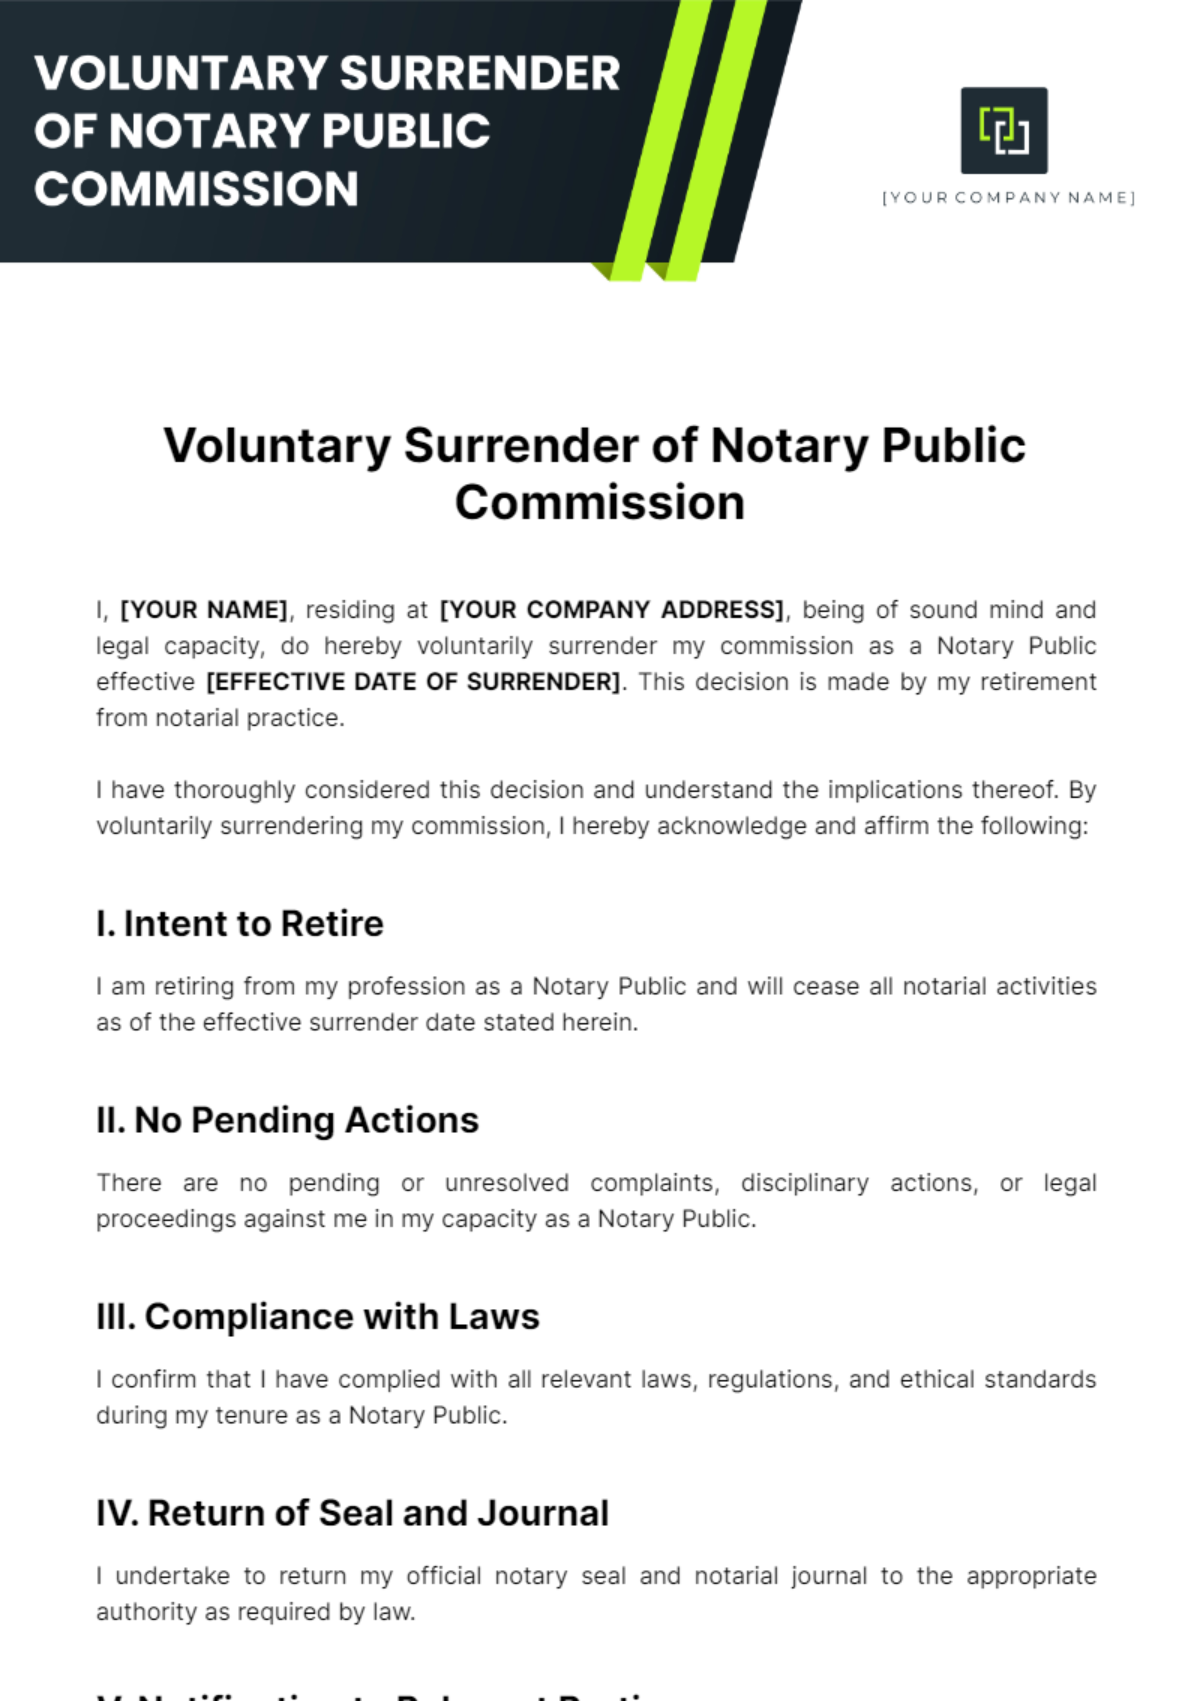 Free Voluntary Surrender Of Notary Public Commission Template